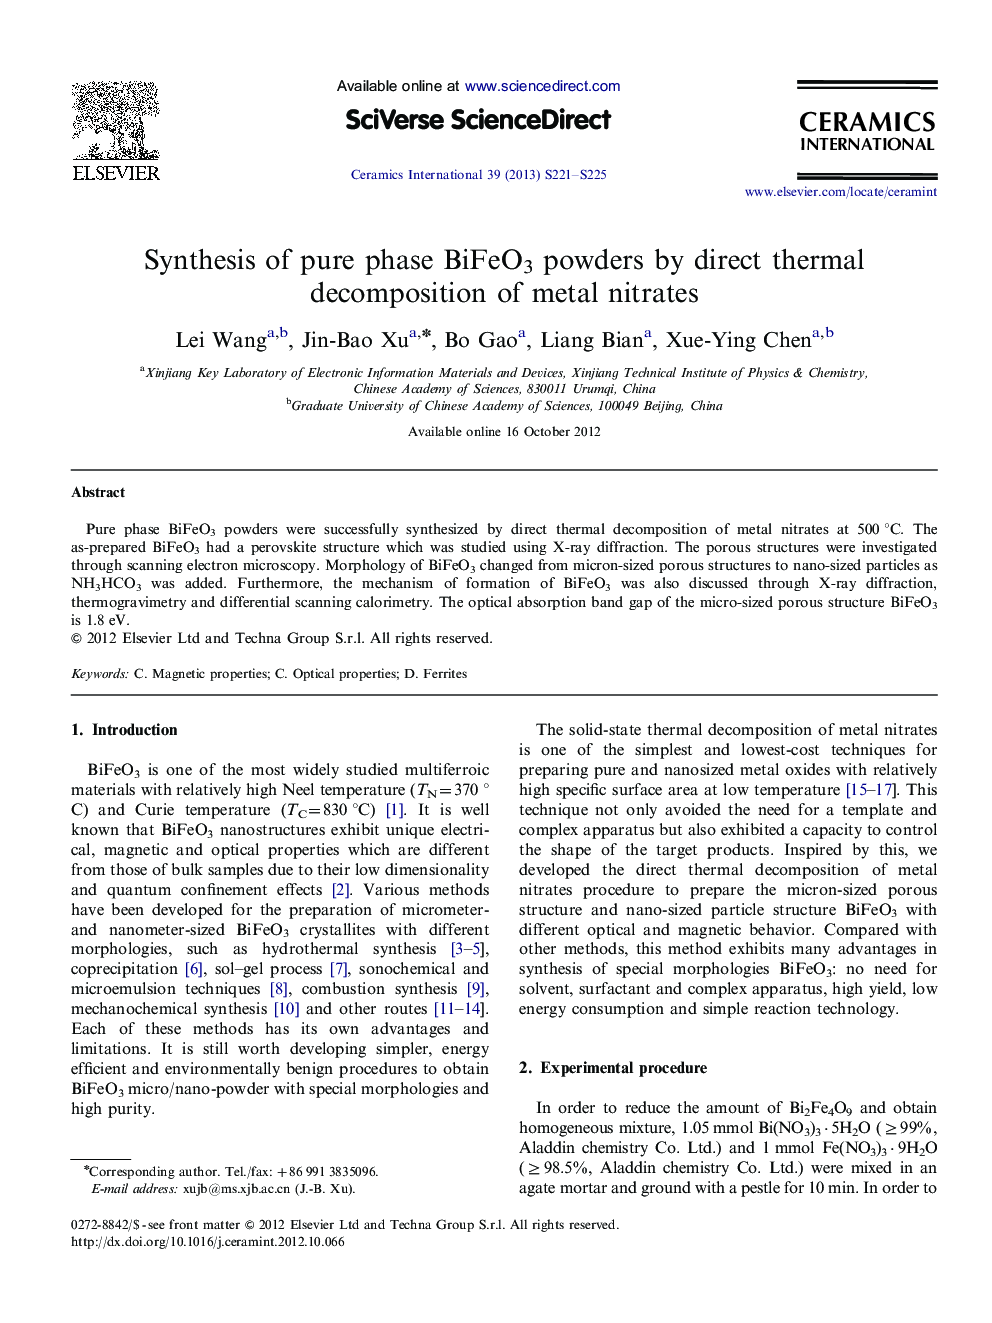 Synthesis of pure phase BiFeO3 powders by direct thermal decomposition of metal nitrates